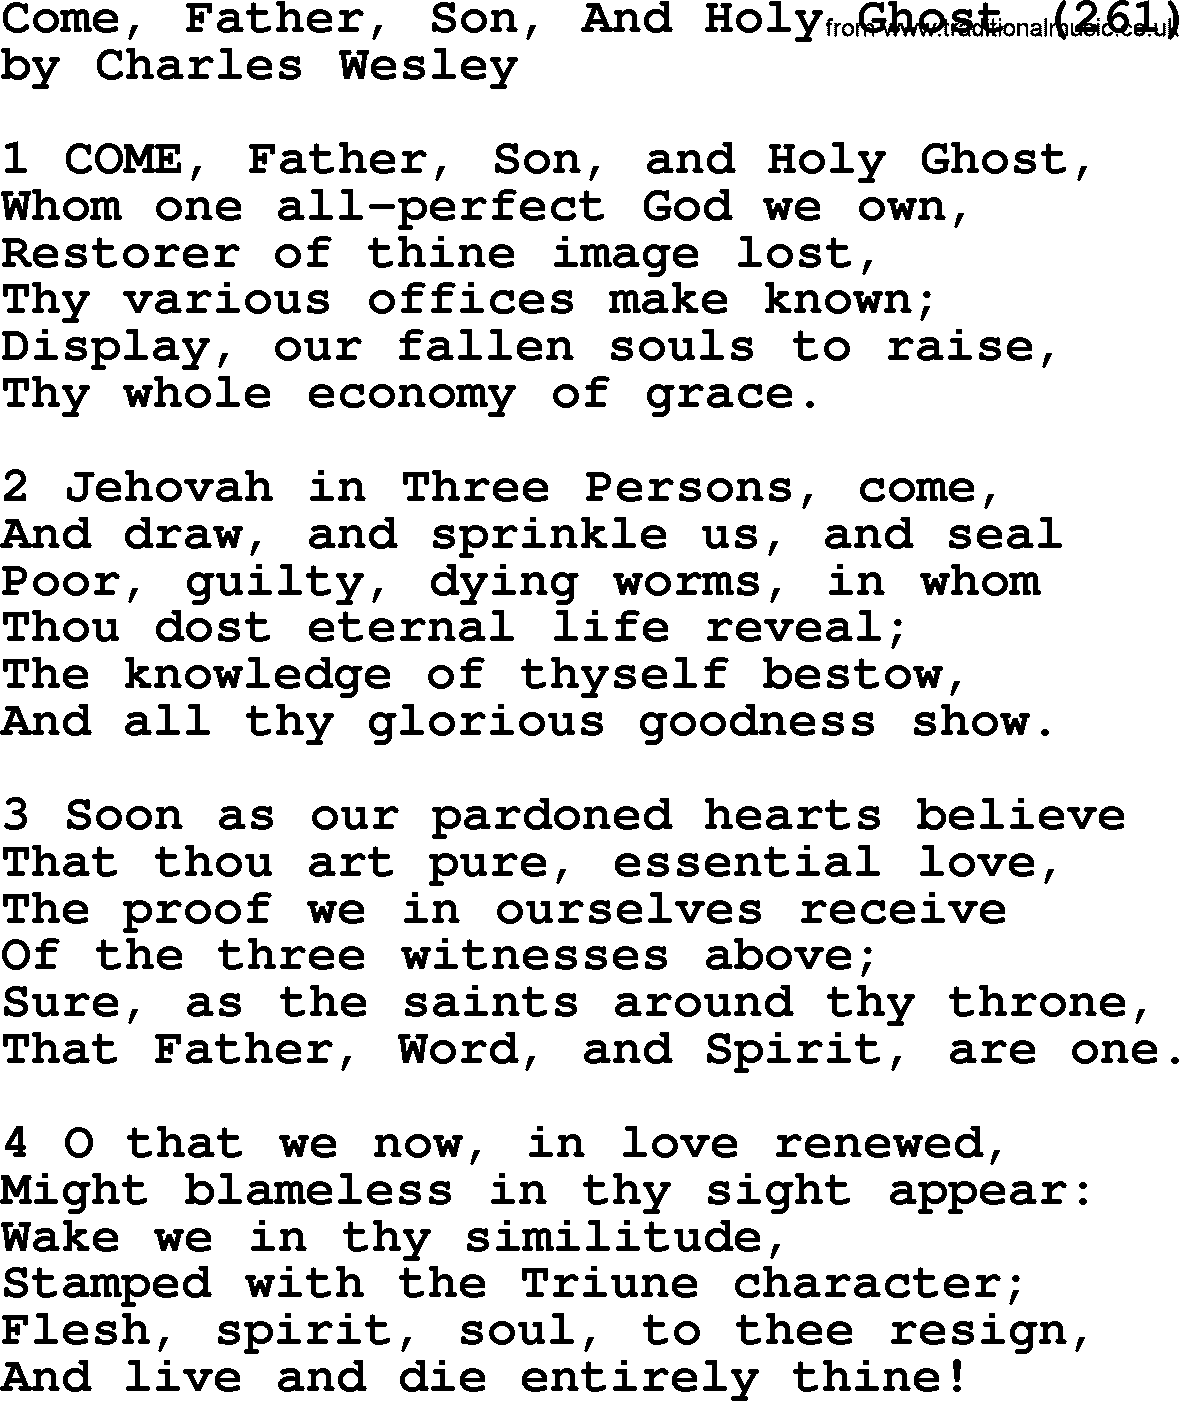 Charles Wesley hymn: Come, Father, Son, And Holy Ghost (261), lyrics